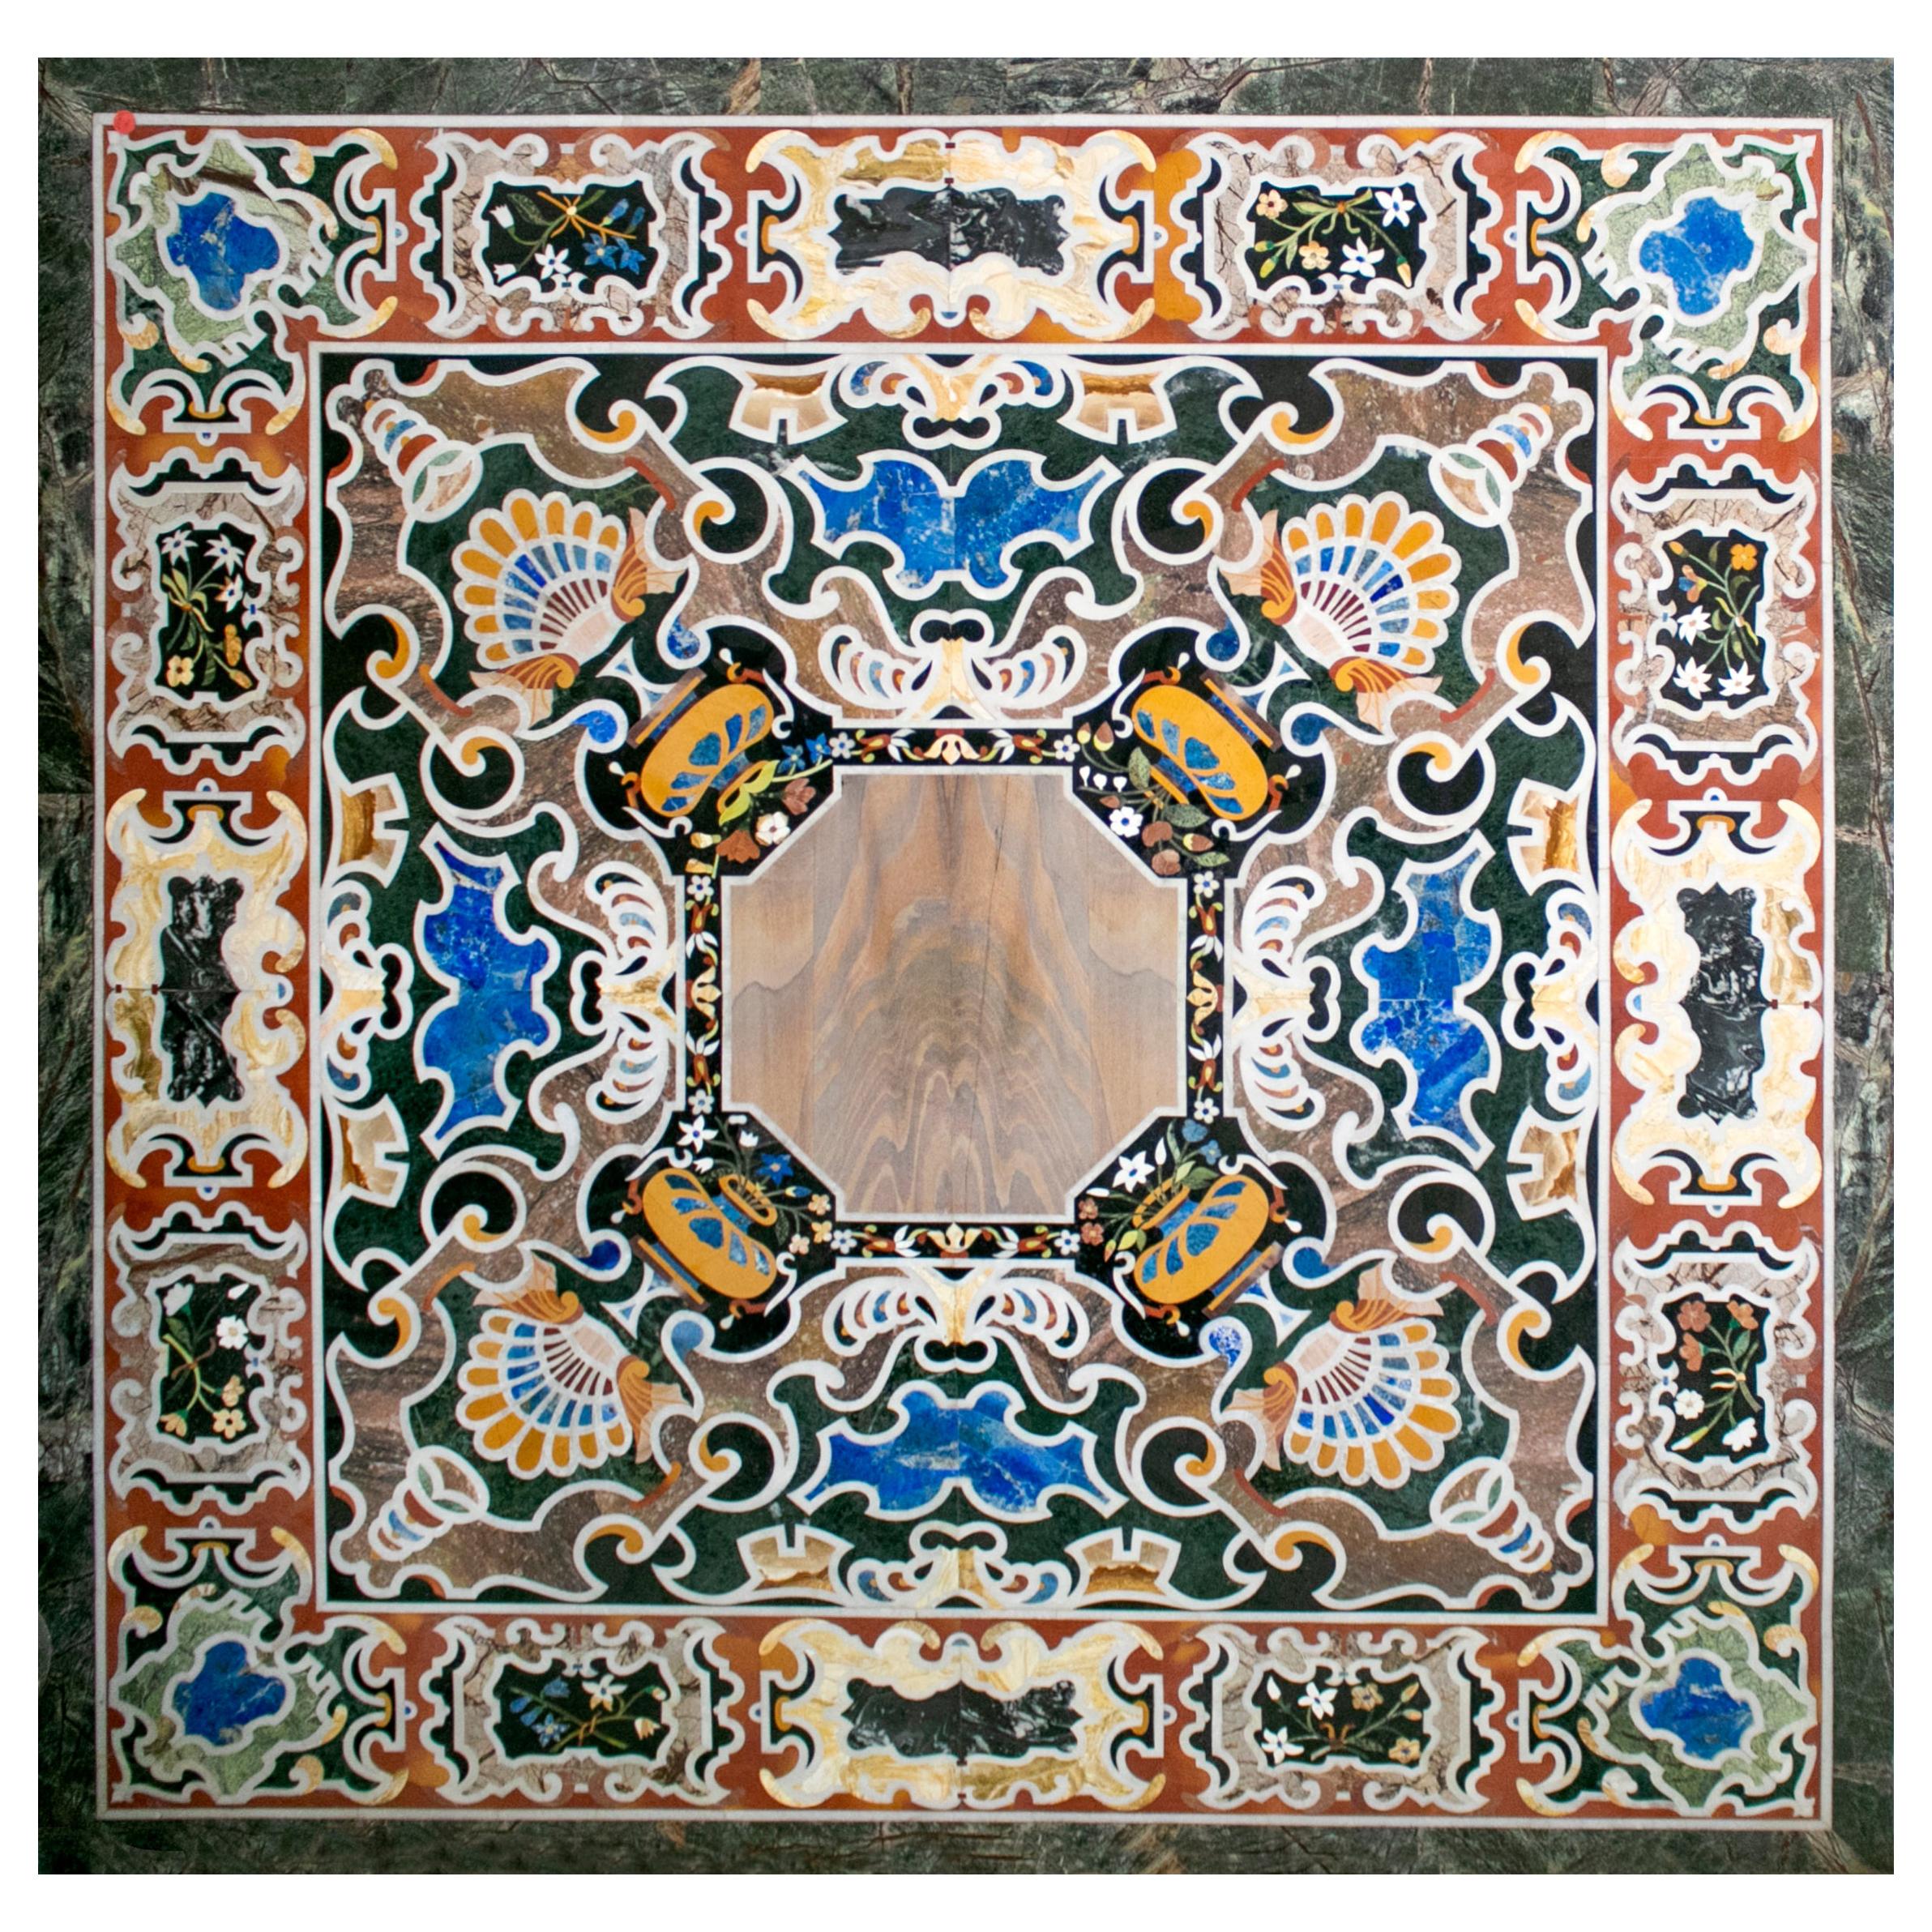 Square Pietre Dure Classical Marble and Lapis Lazuli Mosaic Table Top